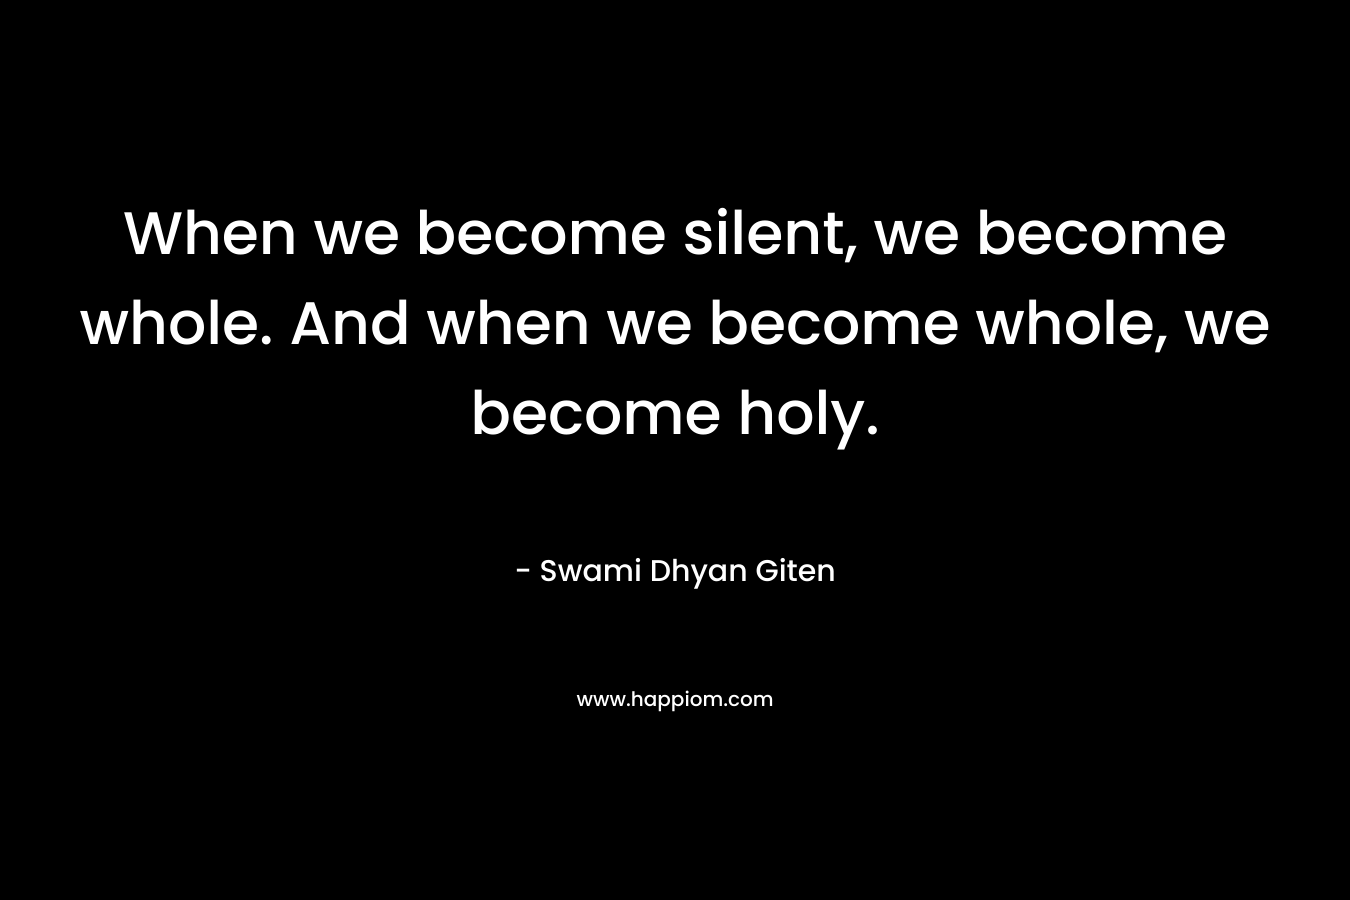 When we become silent, we become whole. And when we become whole, we become holy.